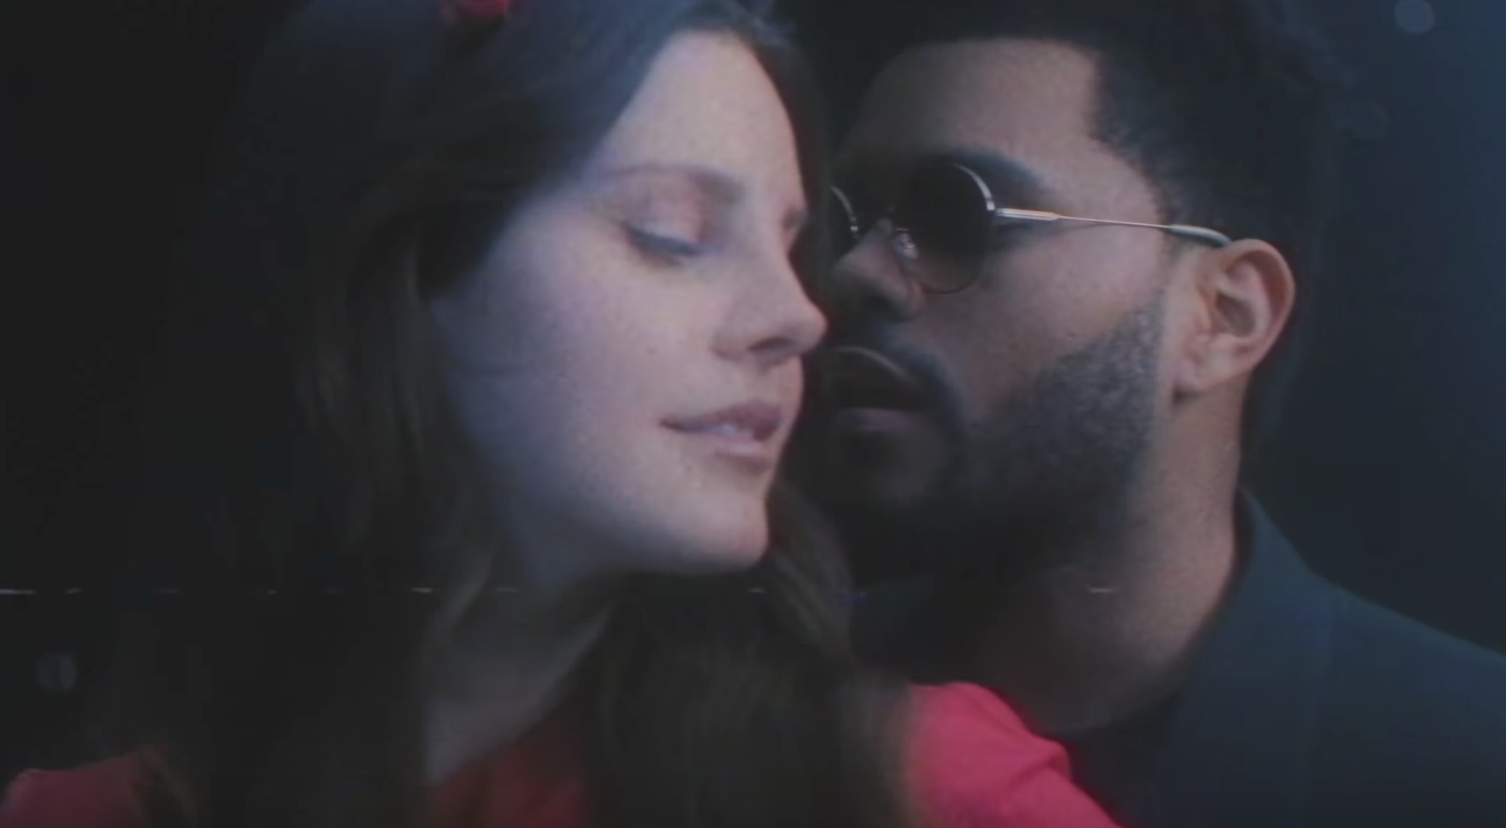 The Weeknd and Lana Del Rey's live shows emphasize their kindred